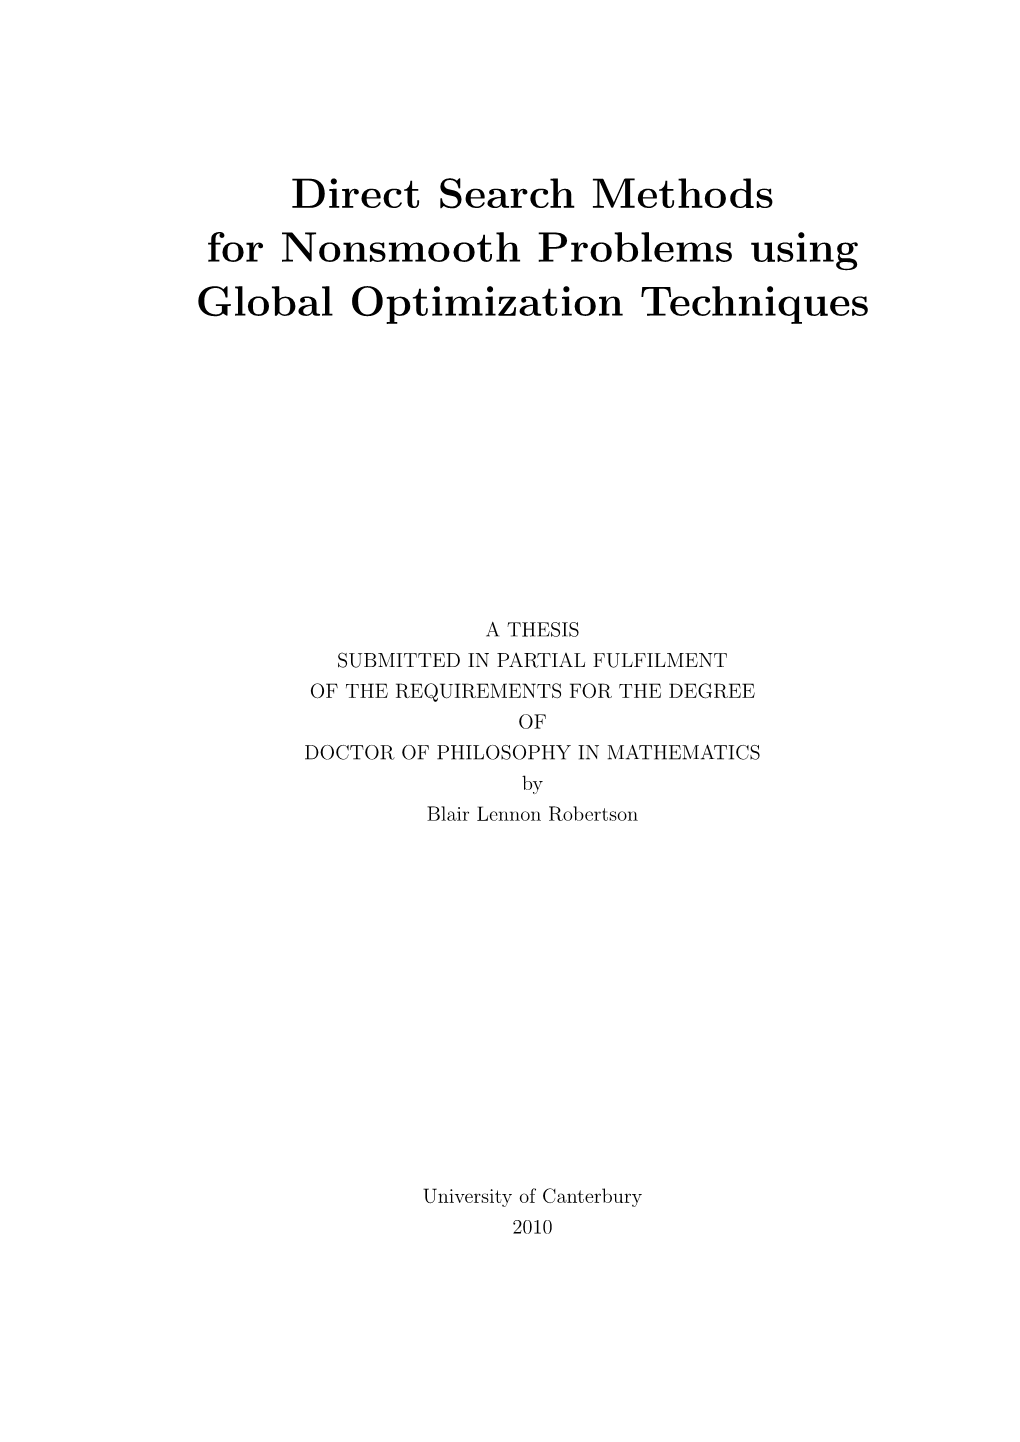 Direct Search Methods for Nonsmooth Problems Using Global Optimization Techniques